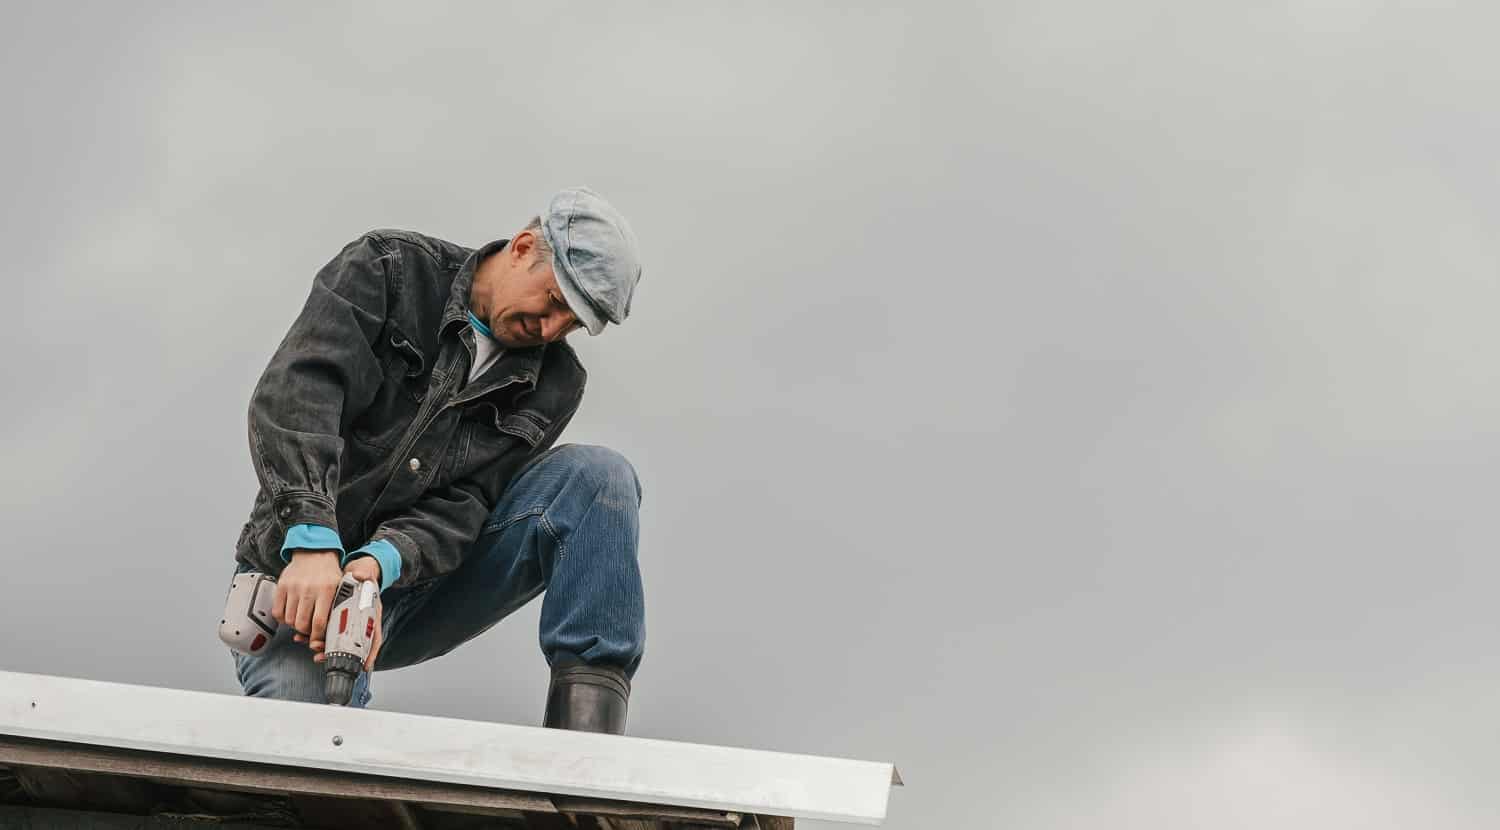 A man in work clothes tighten screws with a screwdriver on the roof against a cloudy sky.